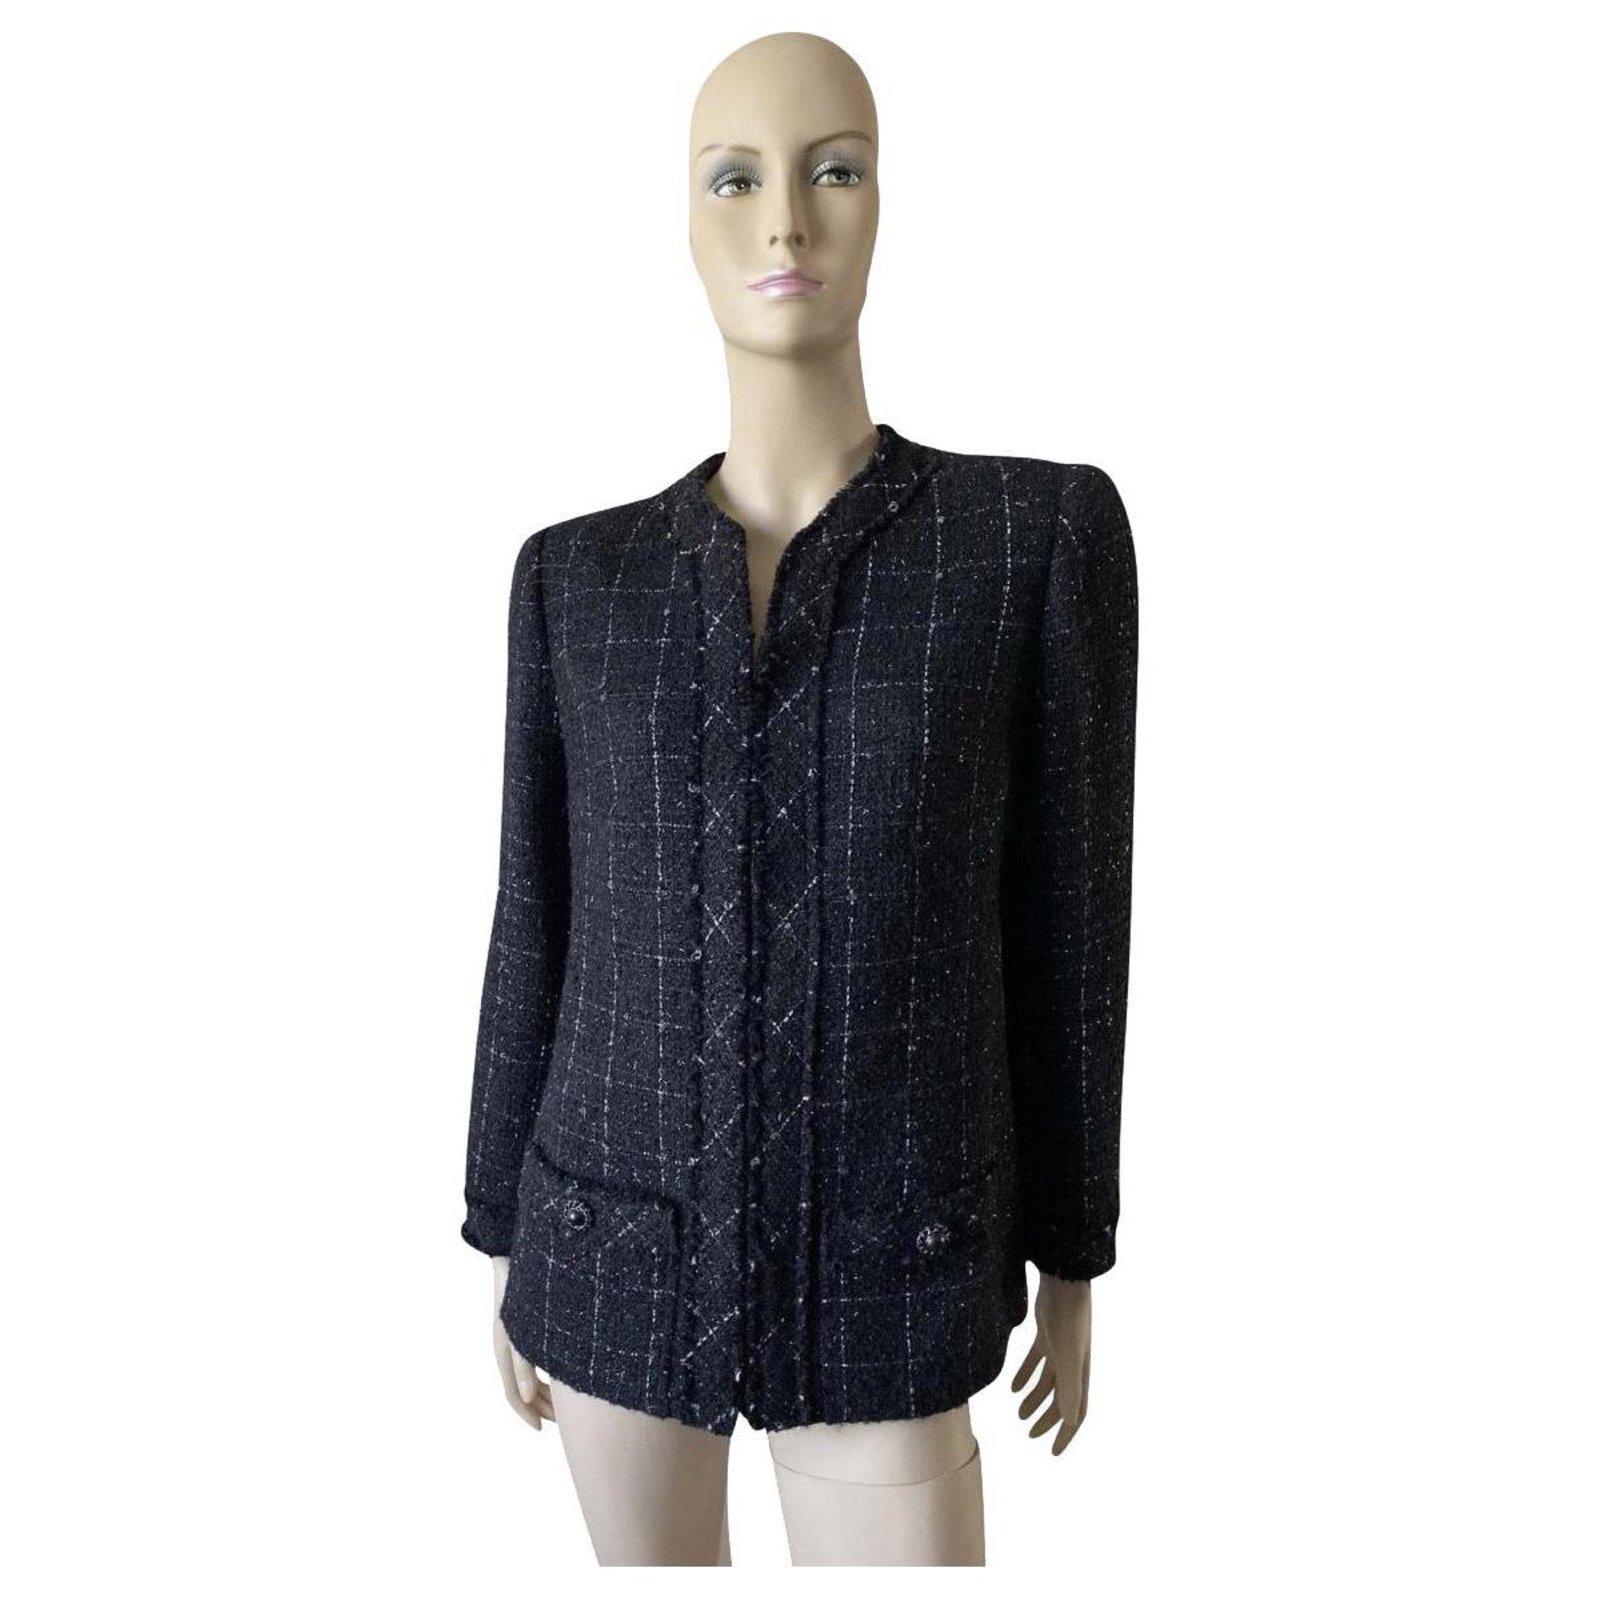 Cambon Chanel, Chanel Tweed Jacket Black Gray New Invoice T40 ref ...